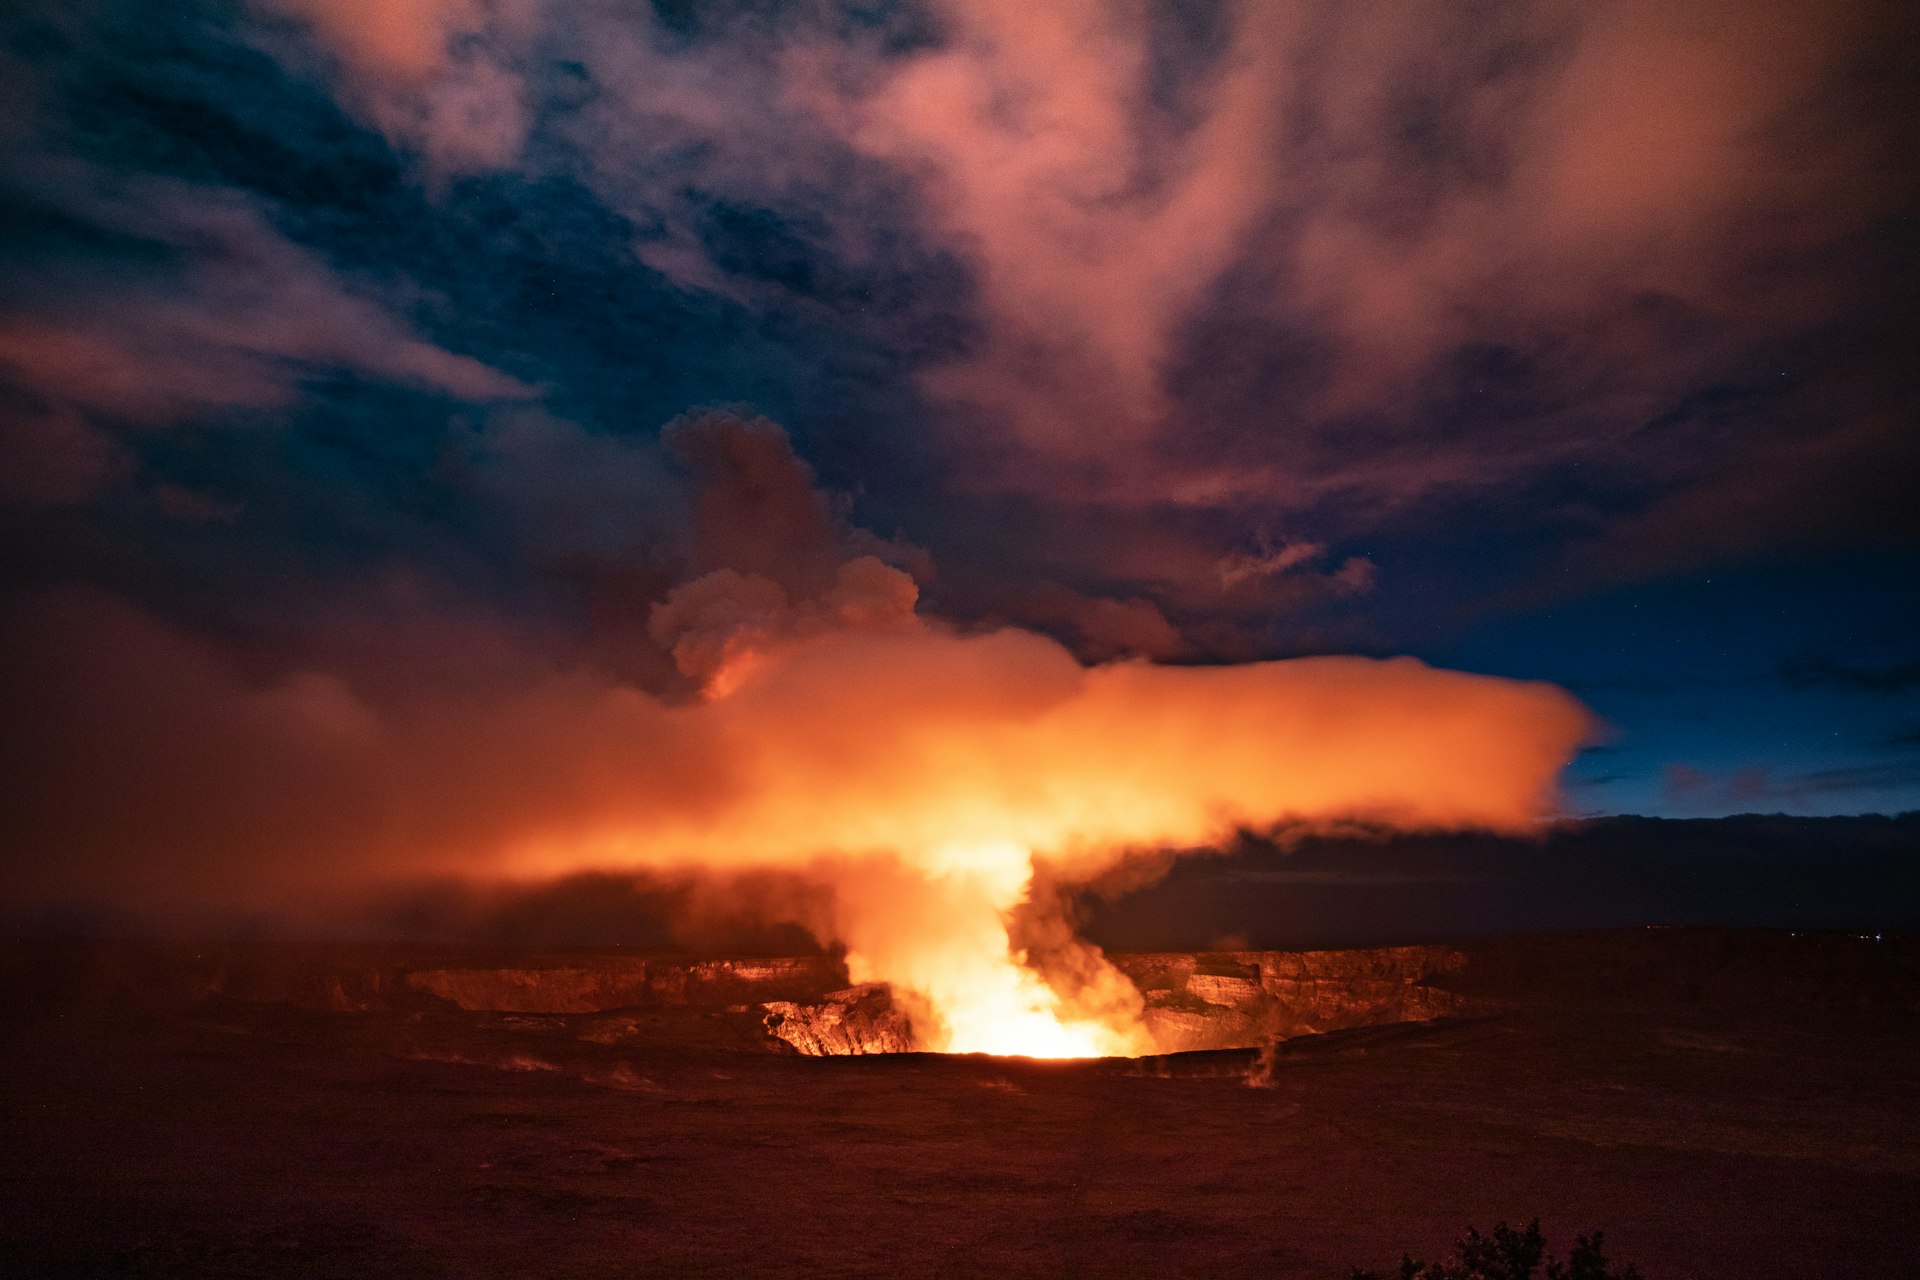 The summit eruption at Kilauea volcano observed from Waldon Ledge in Hawaii Volcanoes National Park on December 21, 2020, the Winter Solstice.